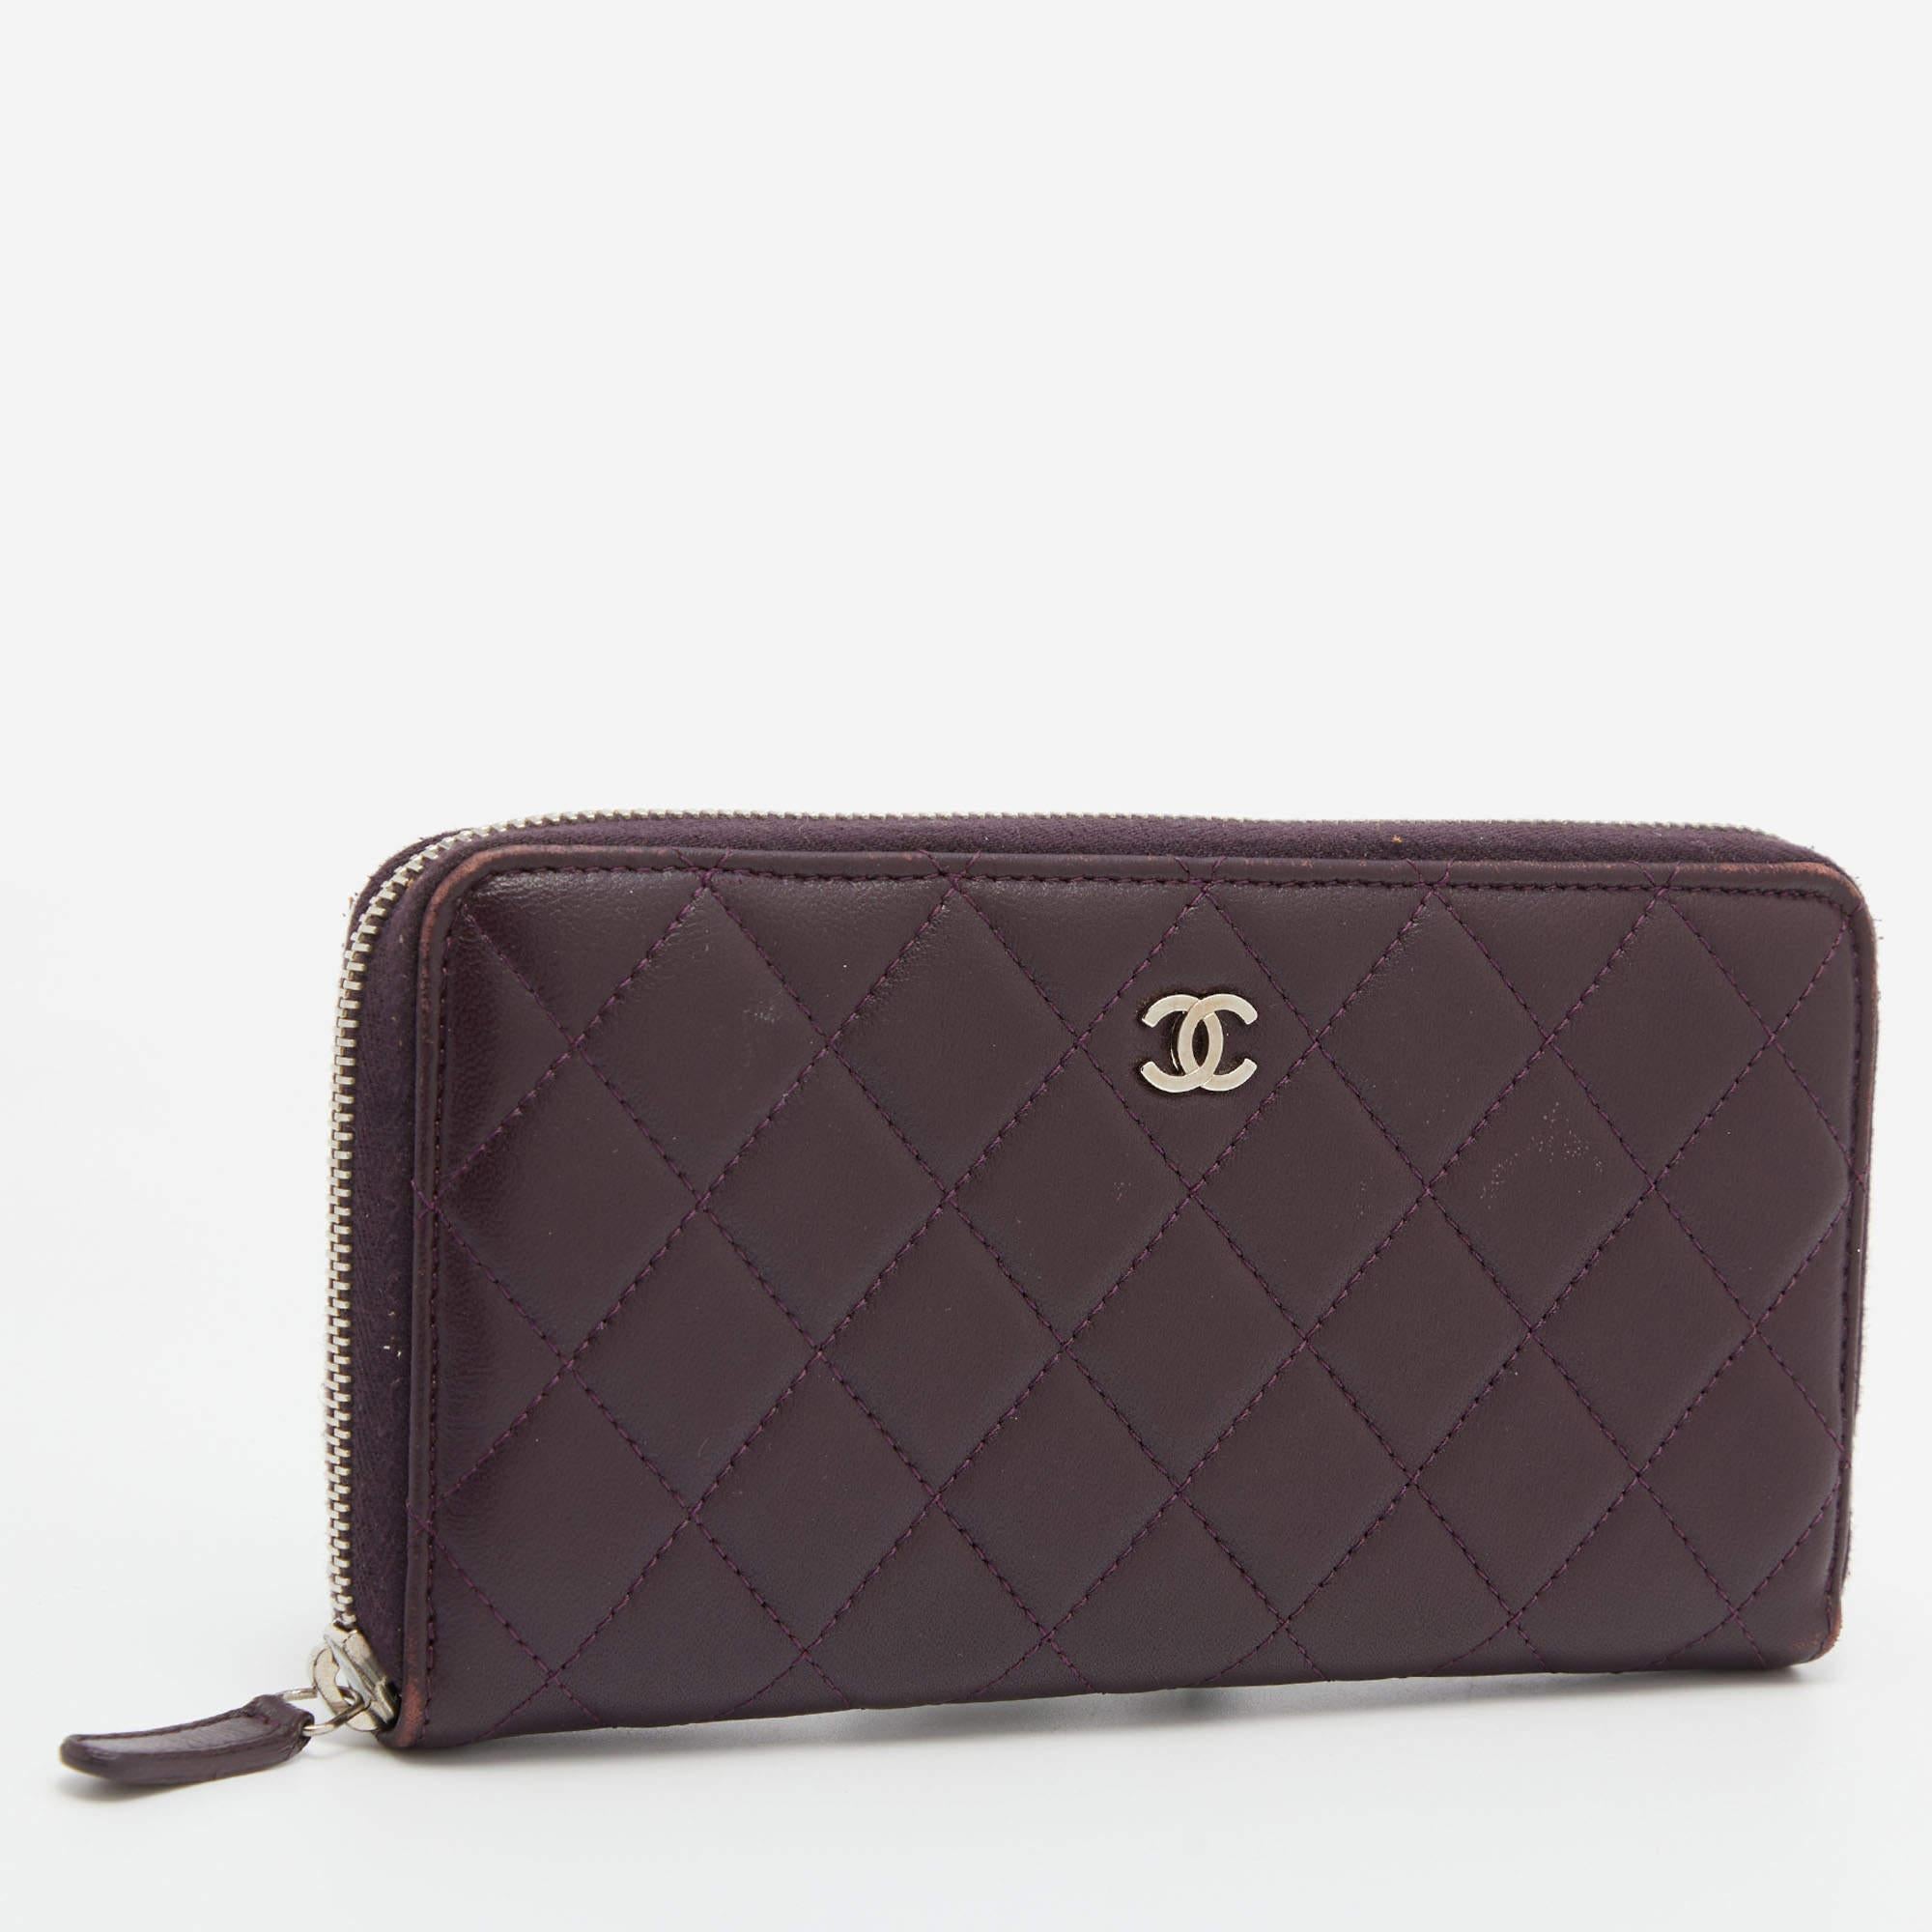 Black Chanel Purple Quilted Leather CC Zip Around Wallet